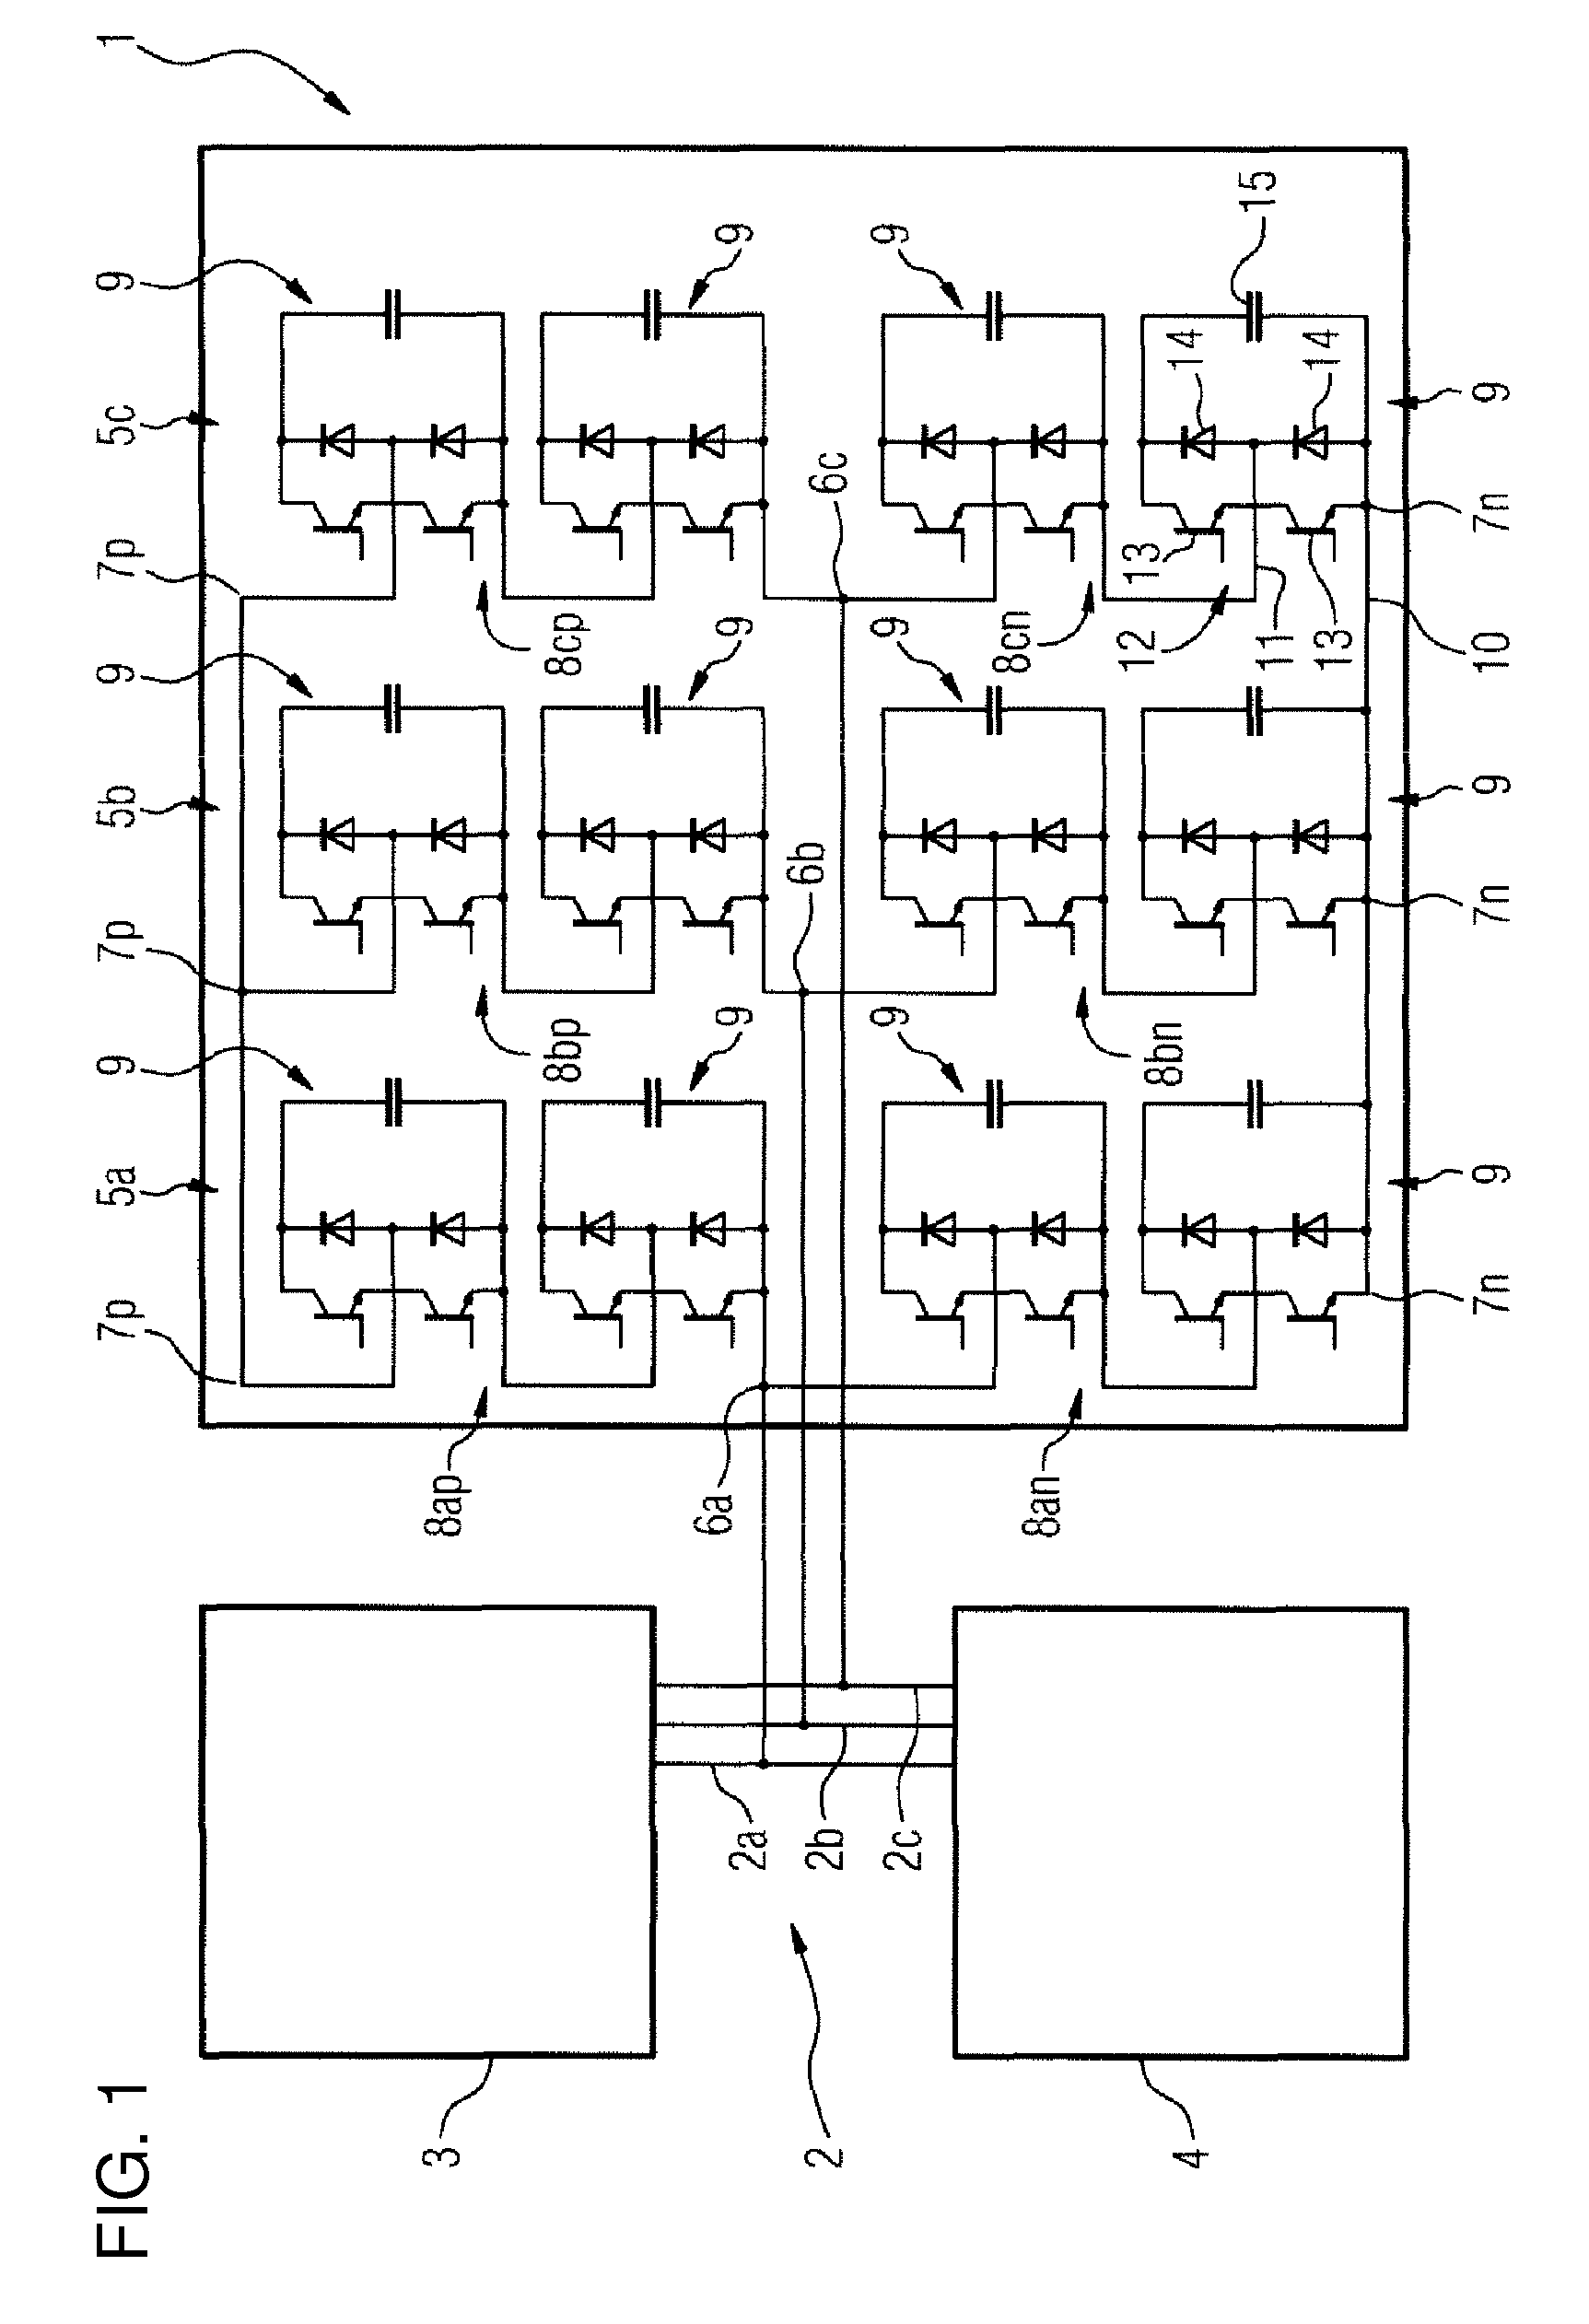 Active filter having a multilevel topology